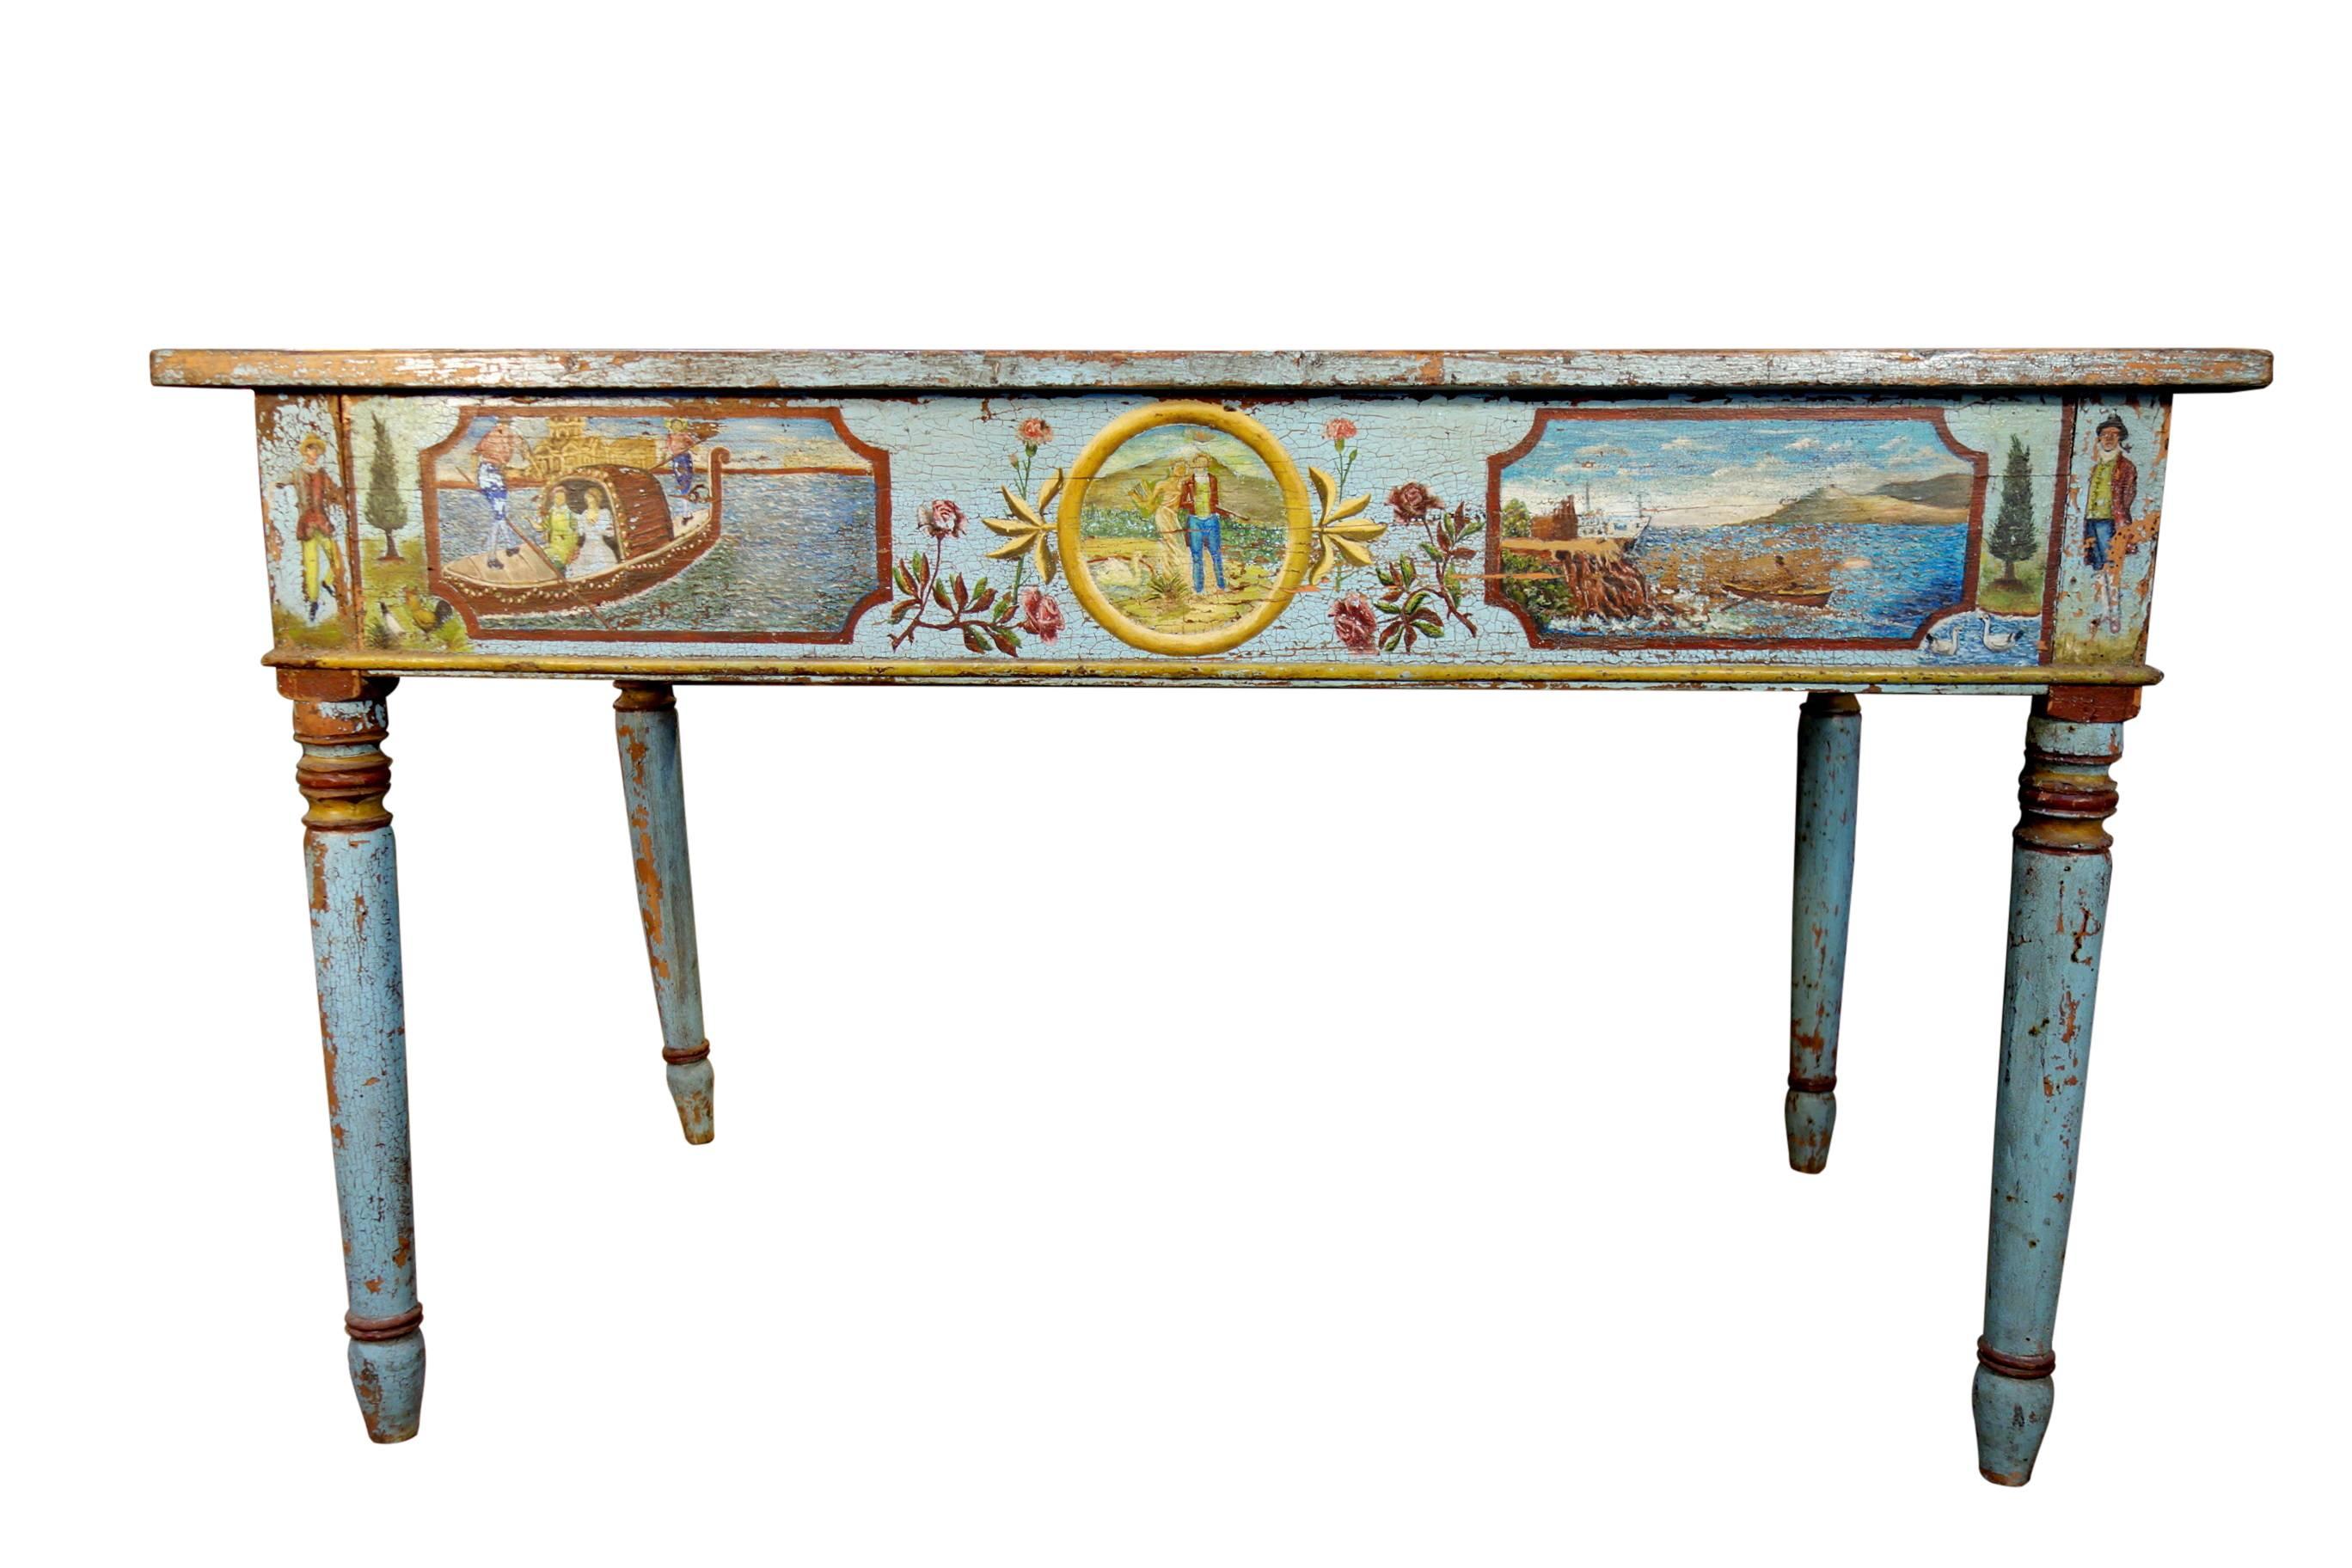 Charming well-preserved Sicilian two-drawer writing desk featuring lovely honeymoon scenes hand-painted on front and sides and fruits on the drawer side. 
Measures: 51.5